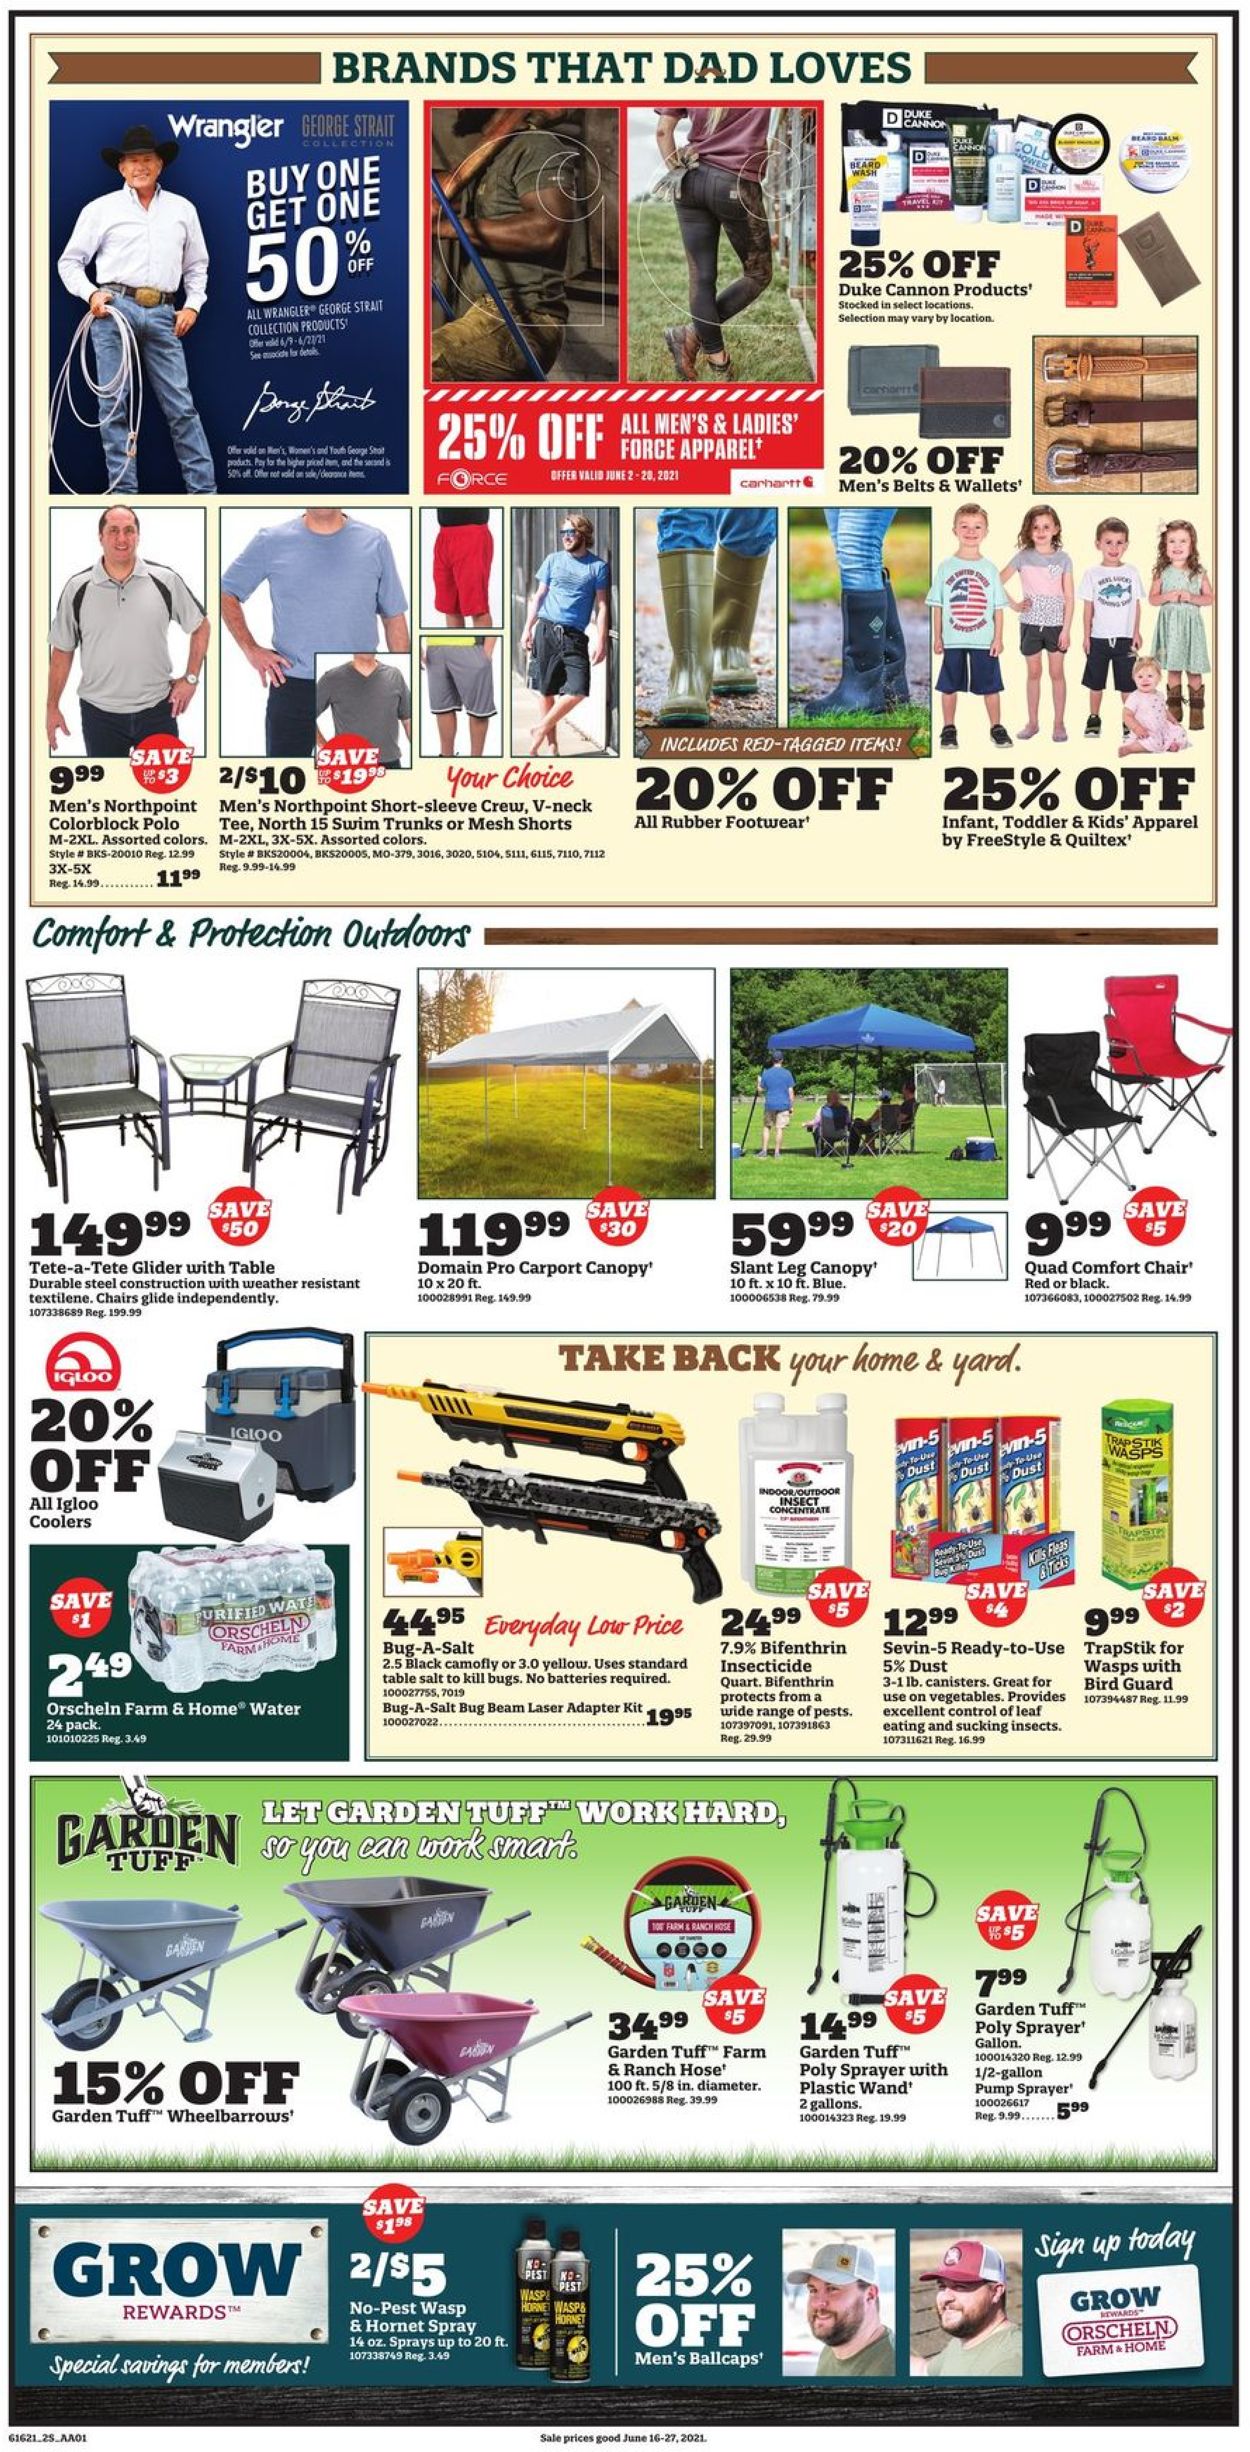 Orscheln Farm and Home Current weekly ad 06/16 06/27/2021 [2